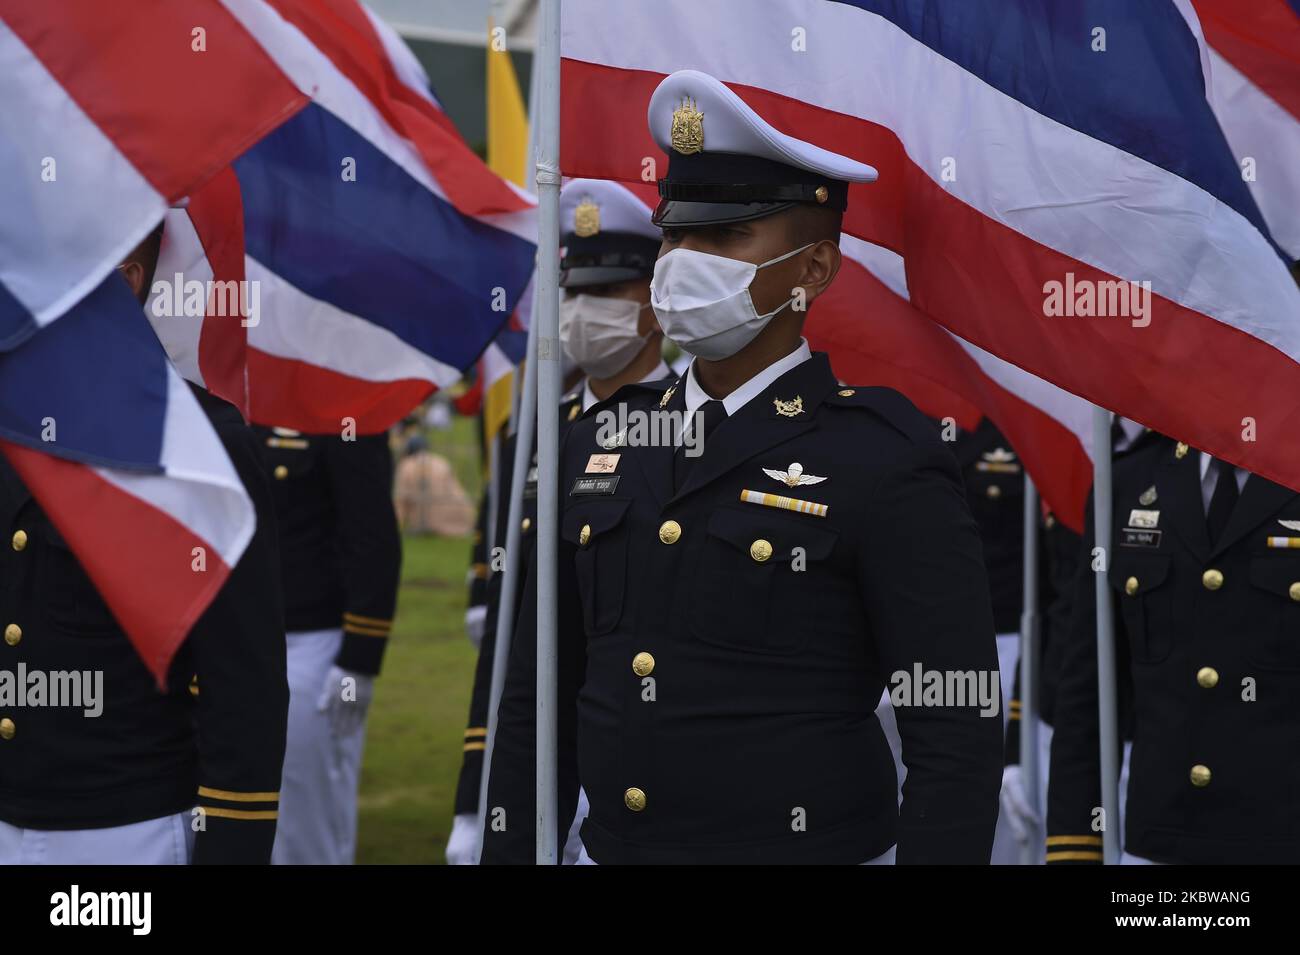 Thai navy officers line up during a celebration to mark the king's 68th birthday, at Sanam Luang in Bangkok, Thailand, 28 July 2020. (Photo by Anusak Laowilas/NurPhoto) Stock Photo